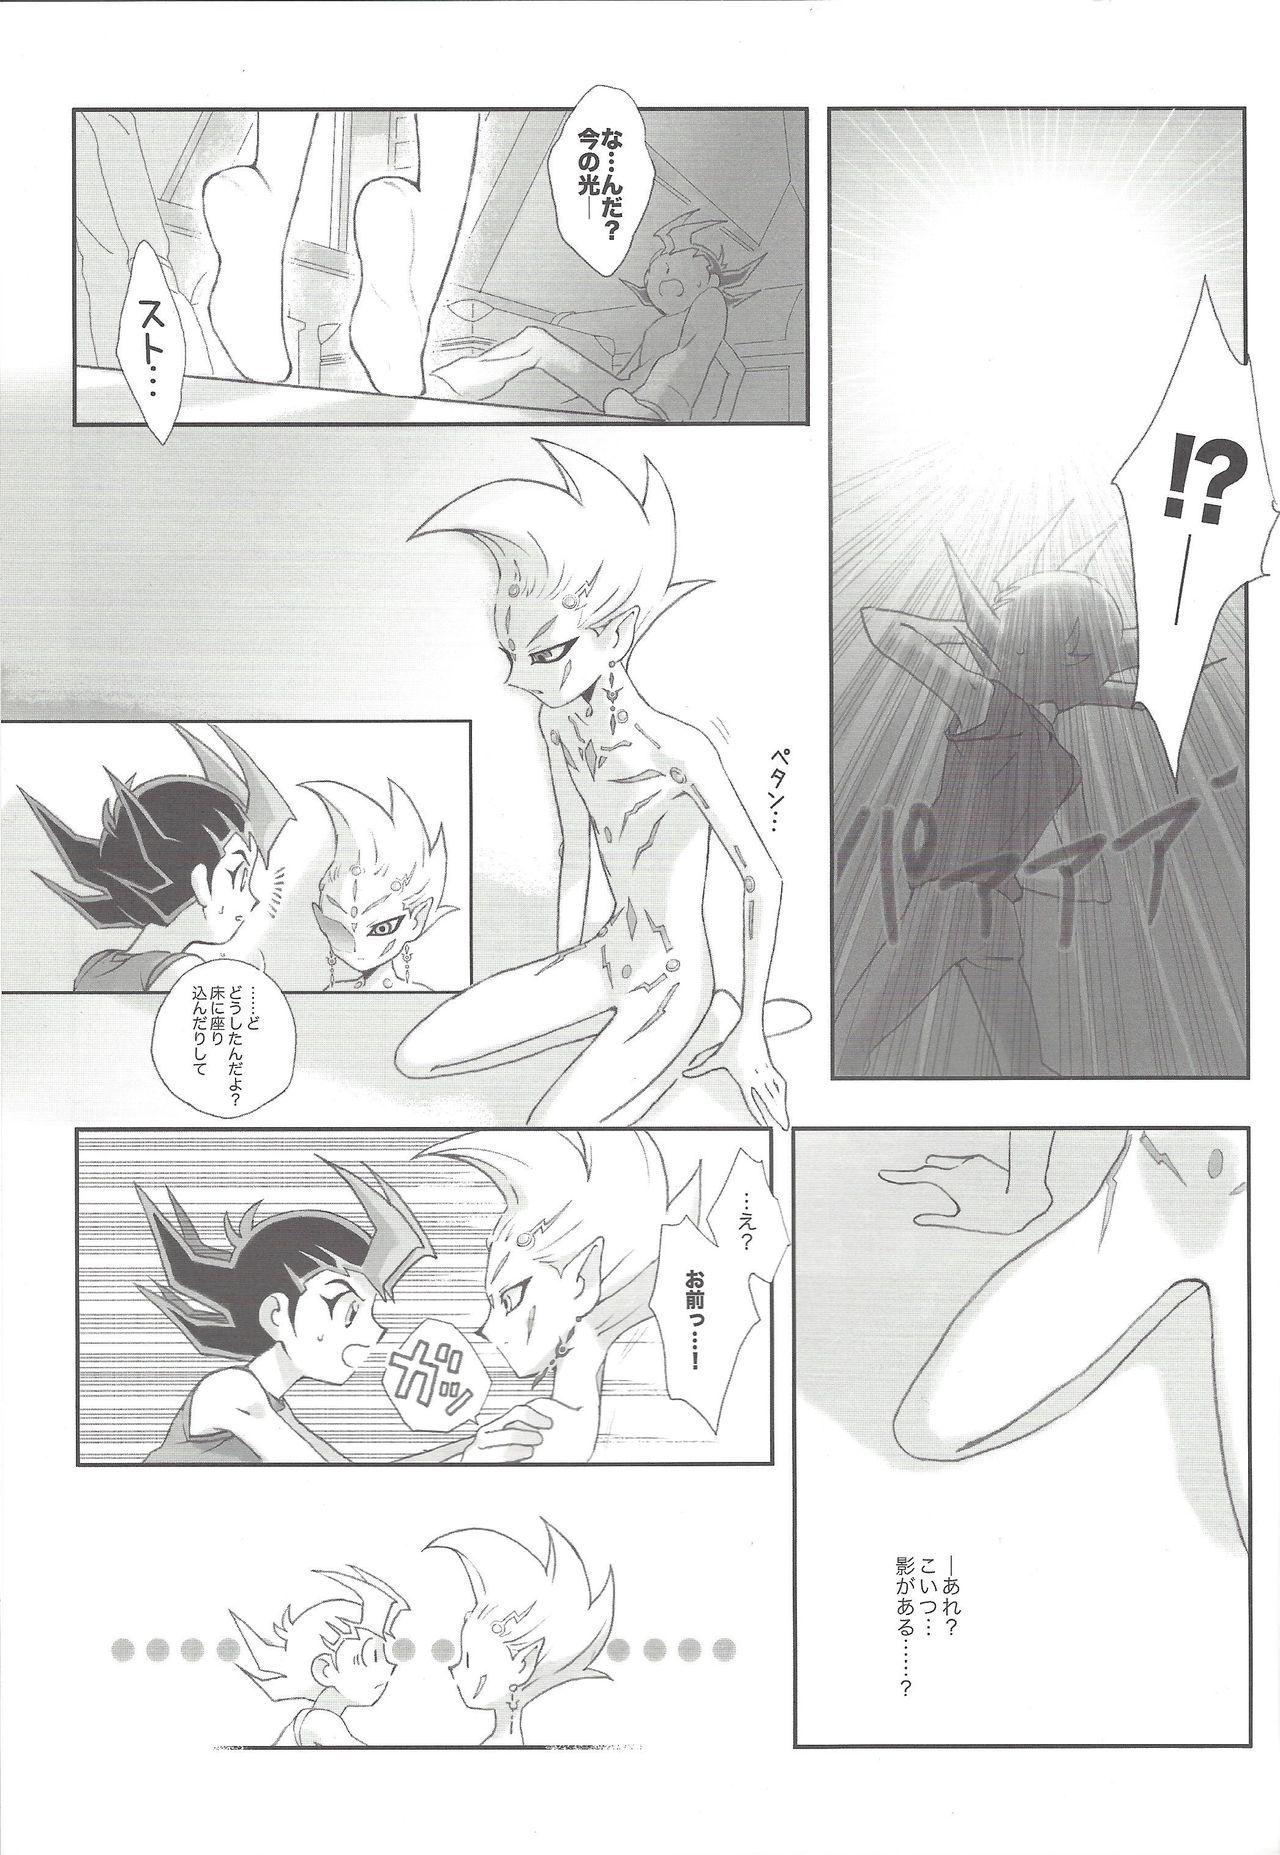 Sex Toys Remain - Yu-gi-oh zexal Sex - Page 6